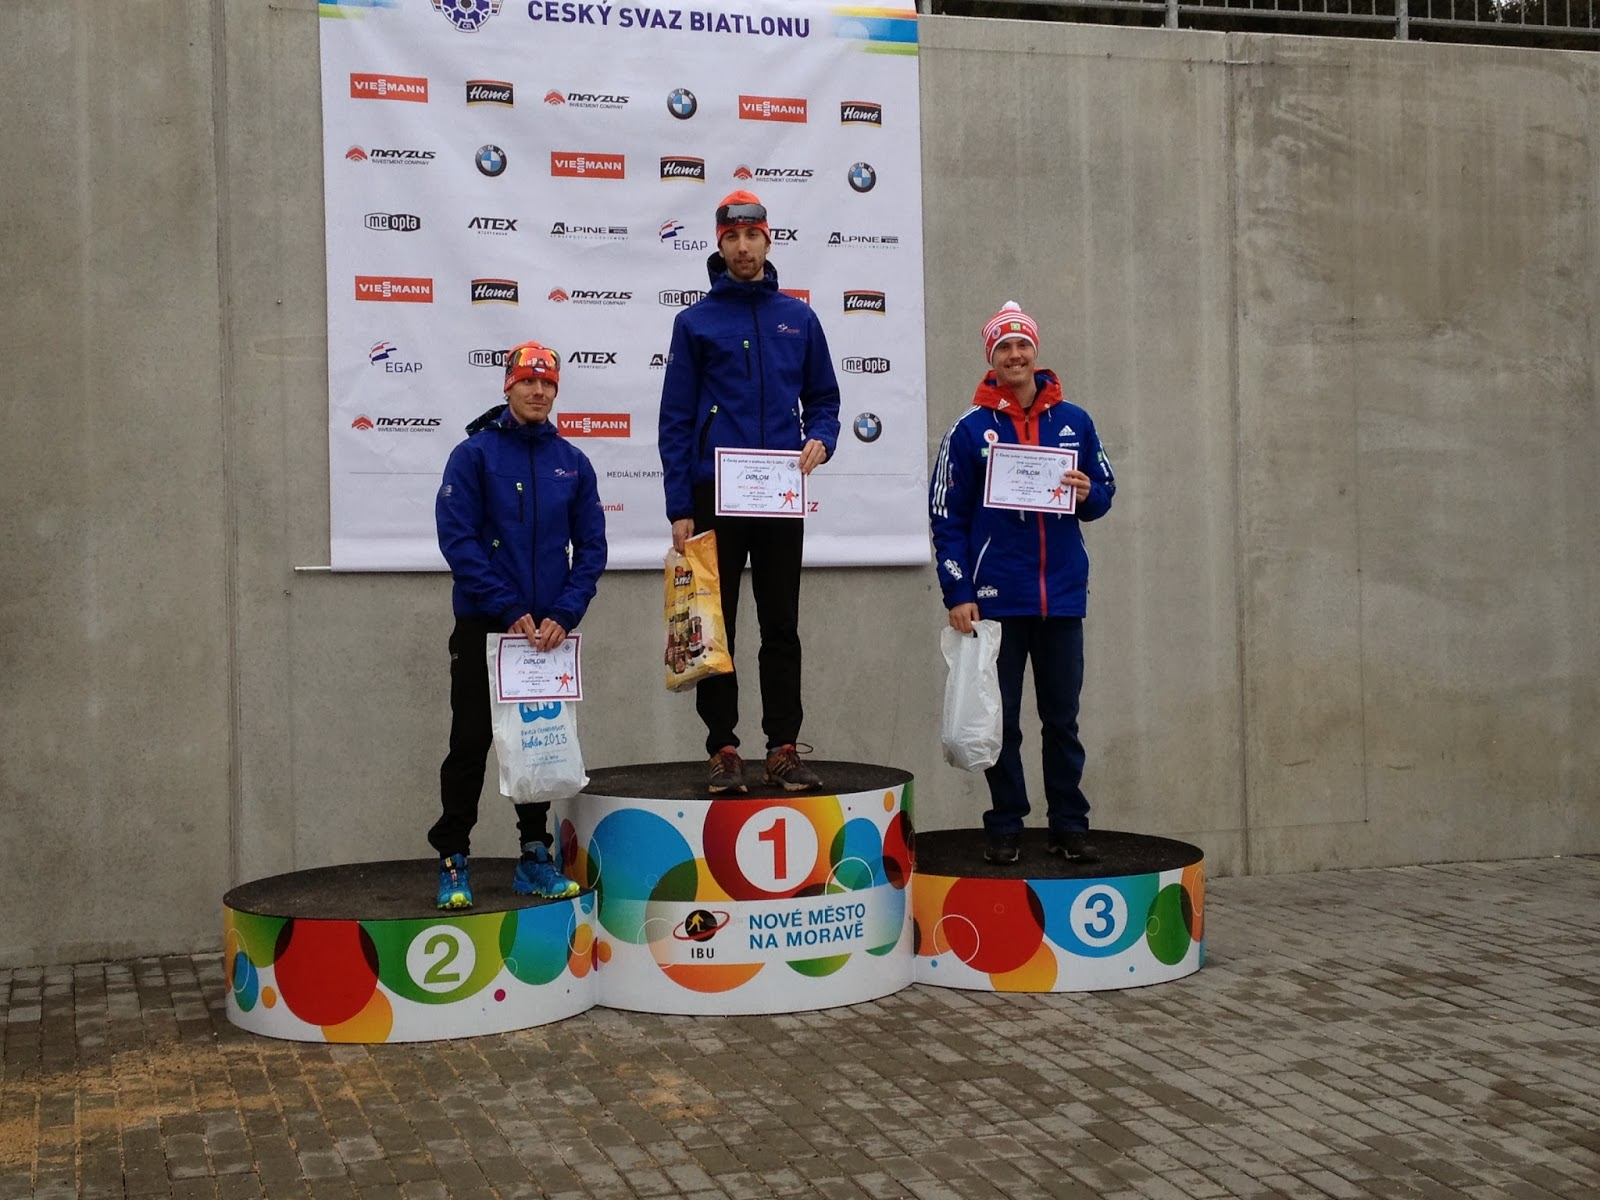 Casey Smith on the podium at a Czech Cup biathlon race in 2014. (Photo courtesy of Casey Smith)